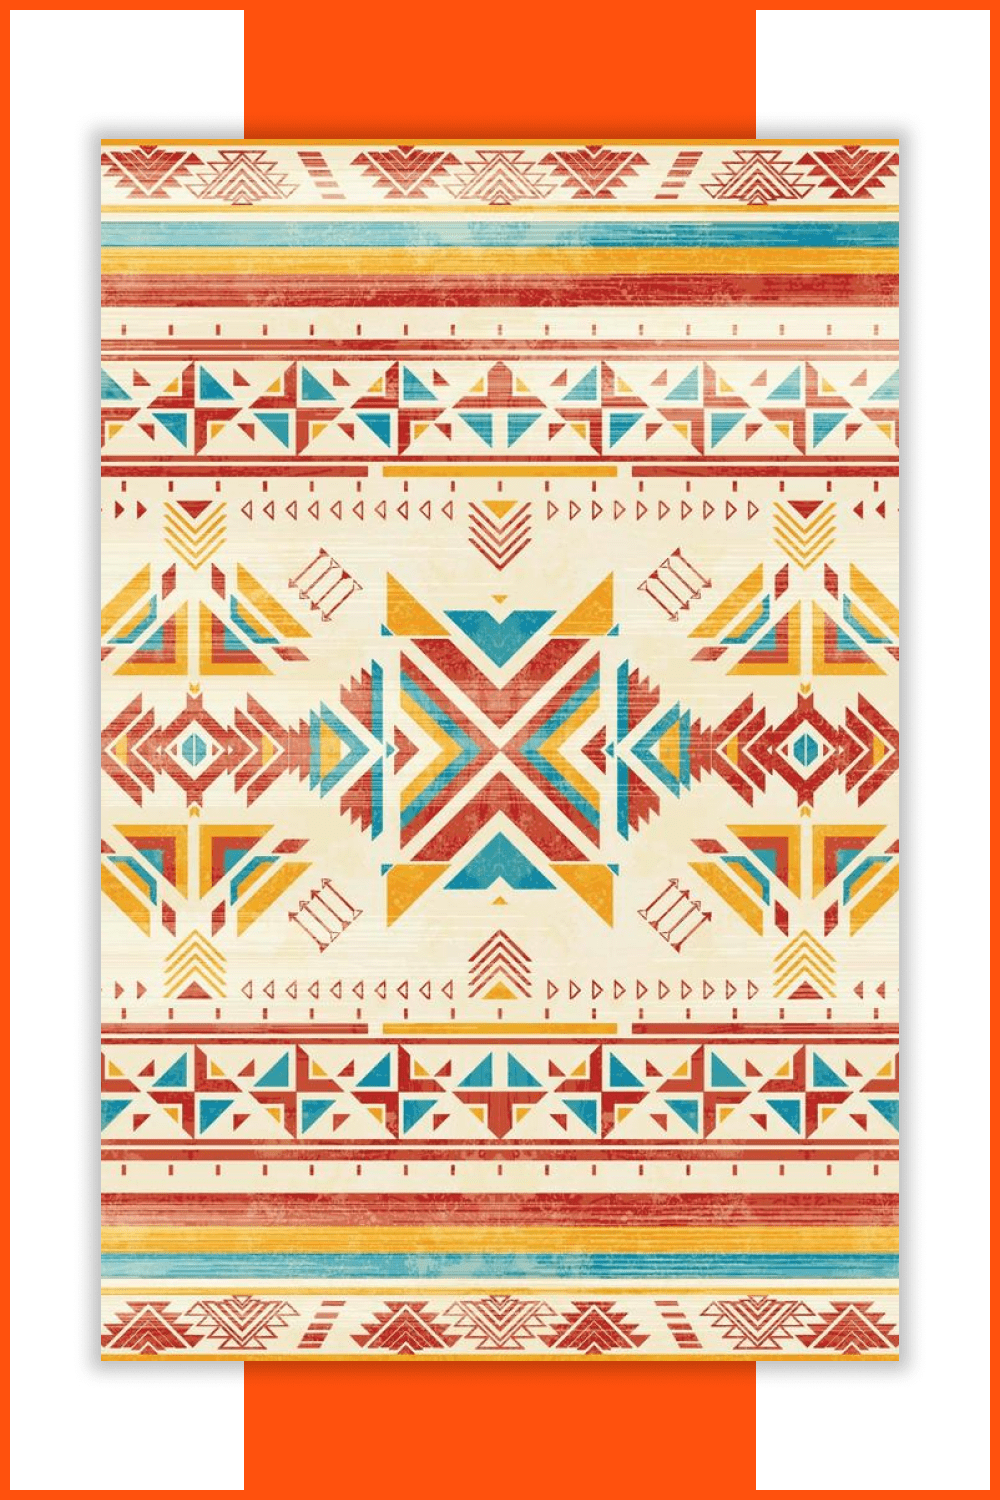 Collage of geometric color images in Indian style on a beige background.